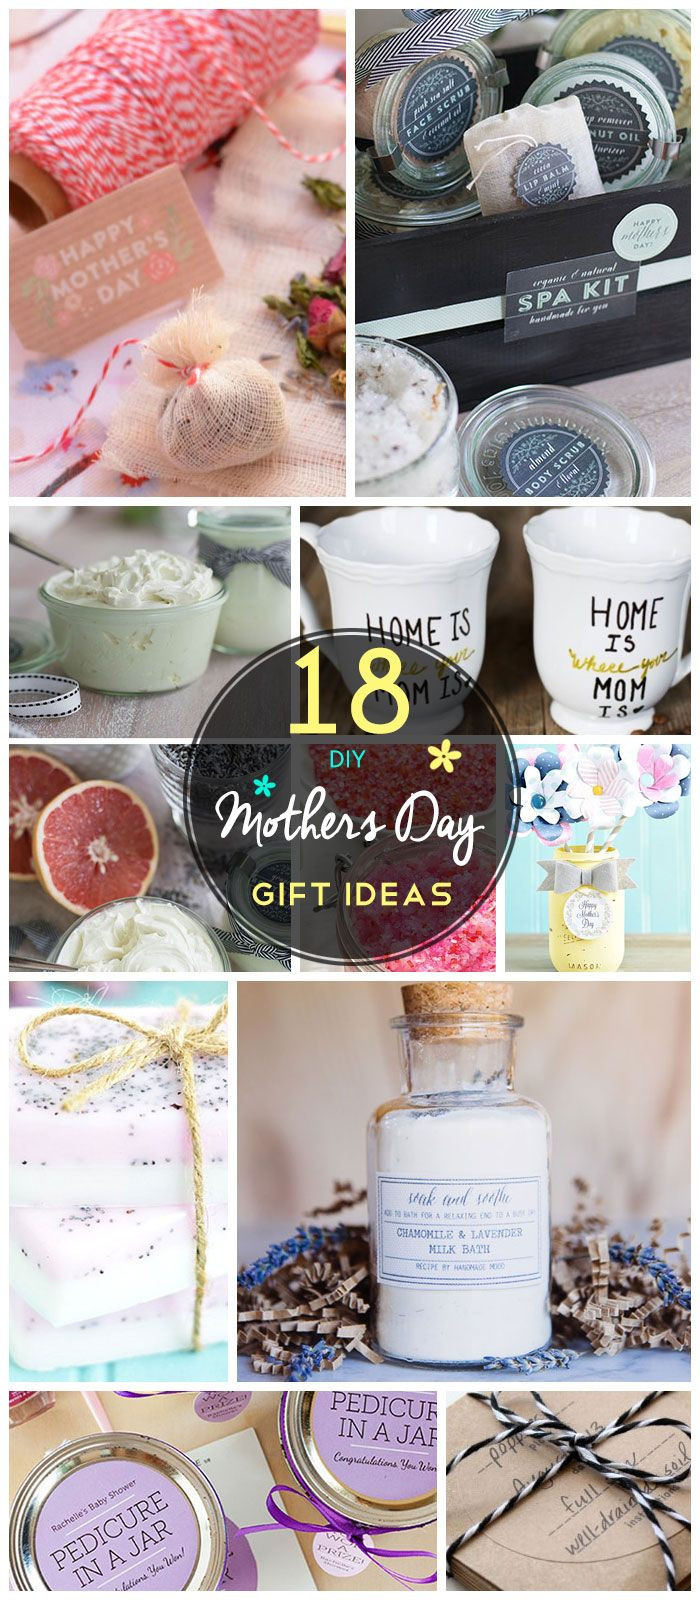 DIY Christmas Gifts For Mom From Daughter
 2427 best Homemade Gift Ideas images on Pinterest